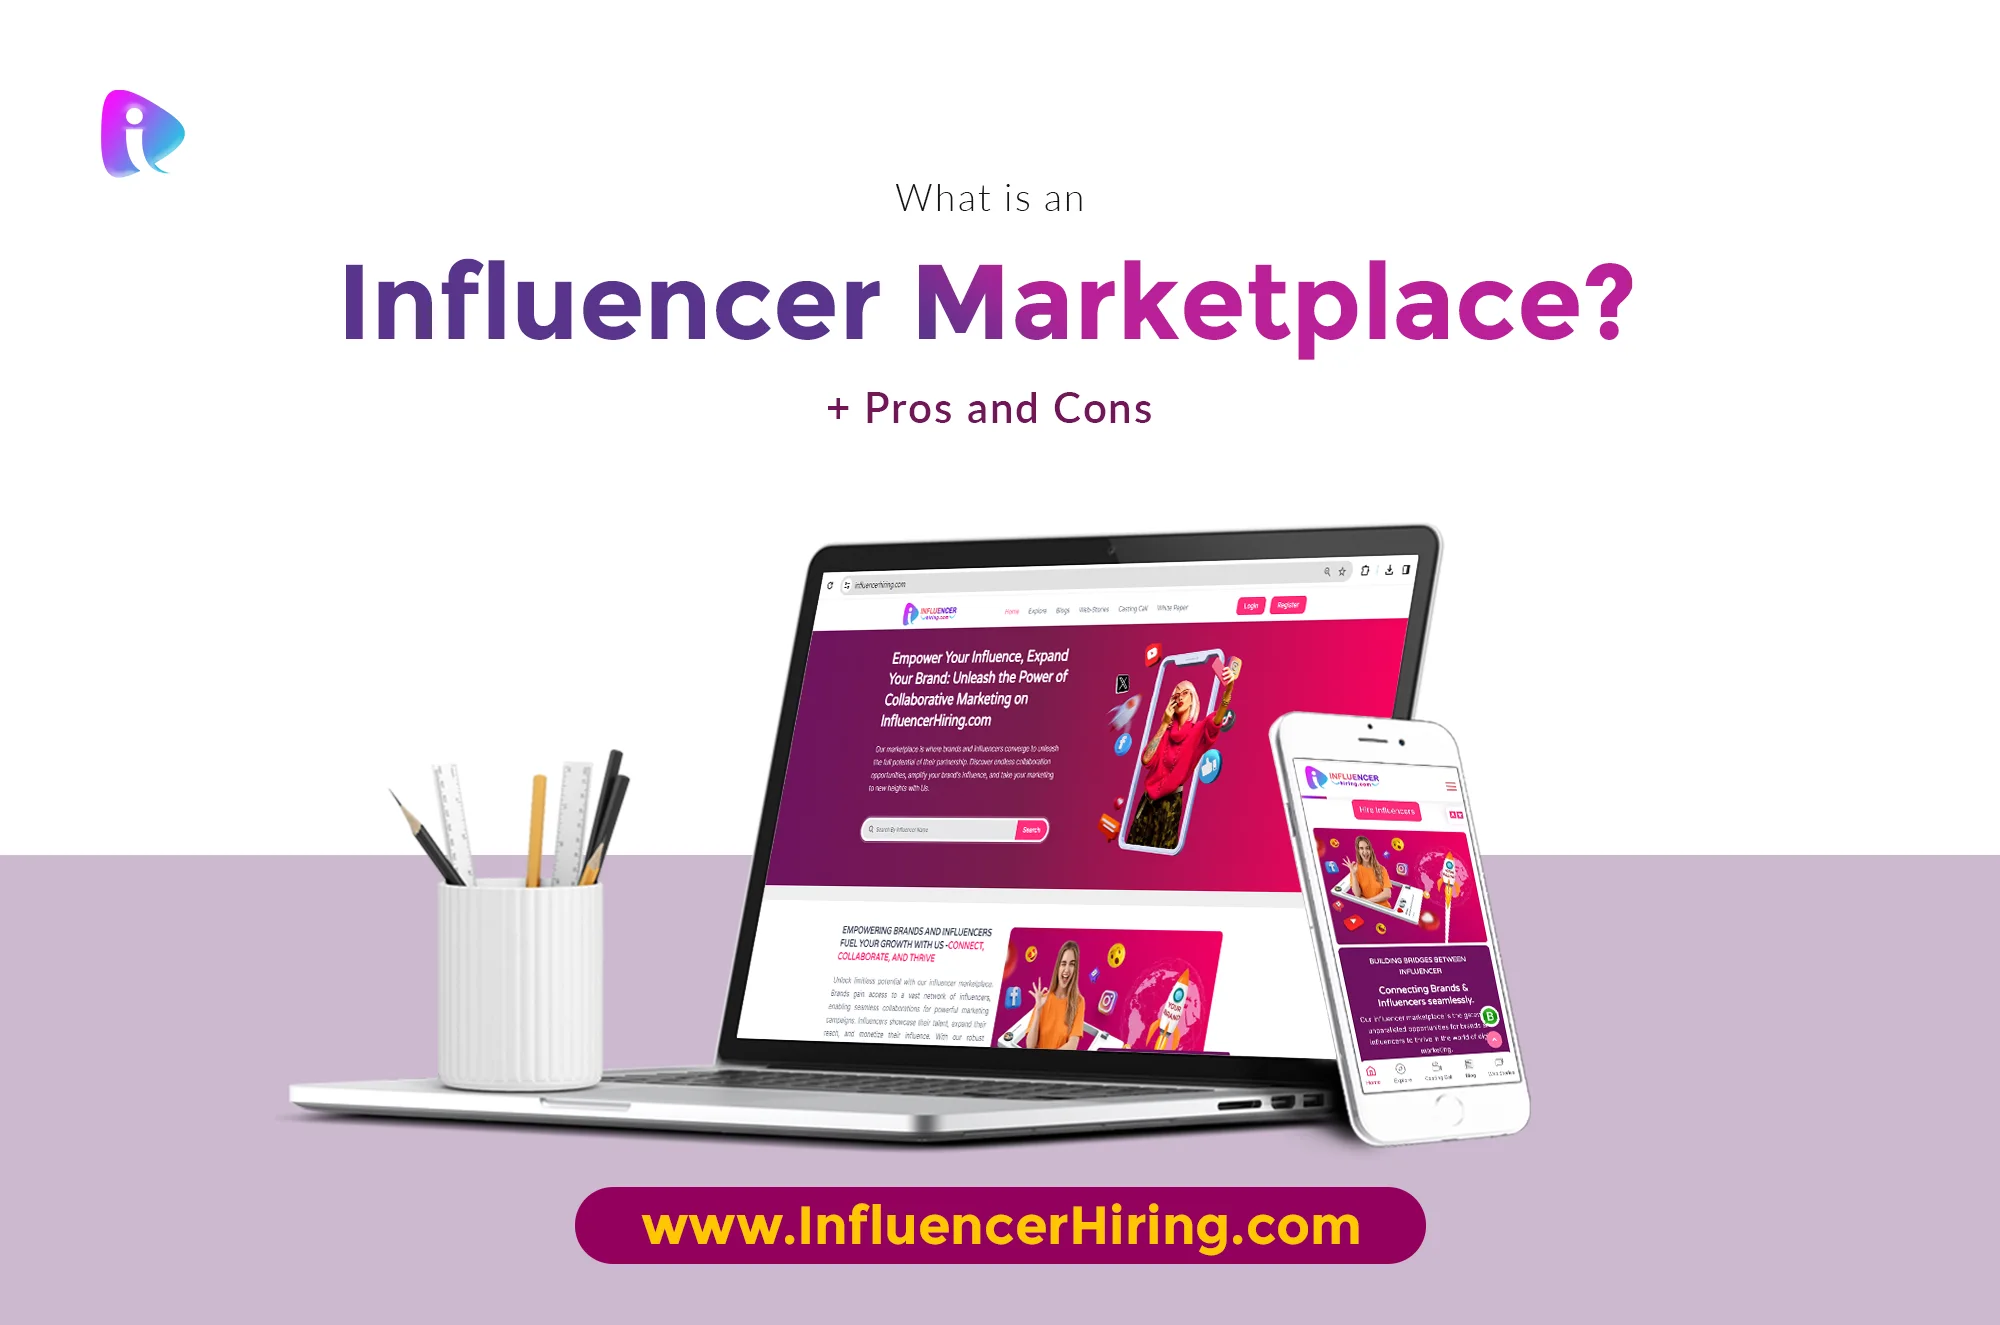 Graphic illustrating the dynamics of influencer marketplaces